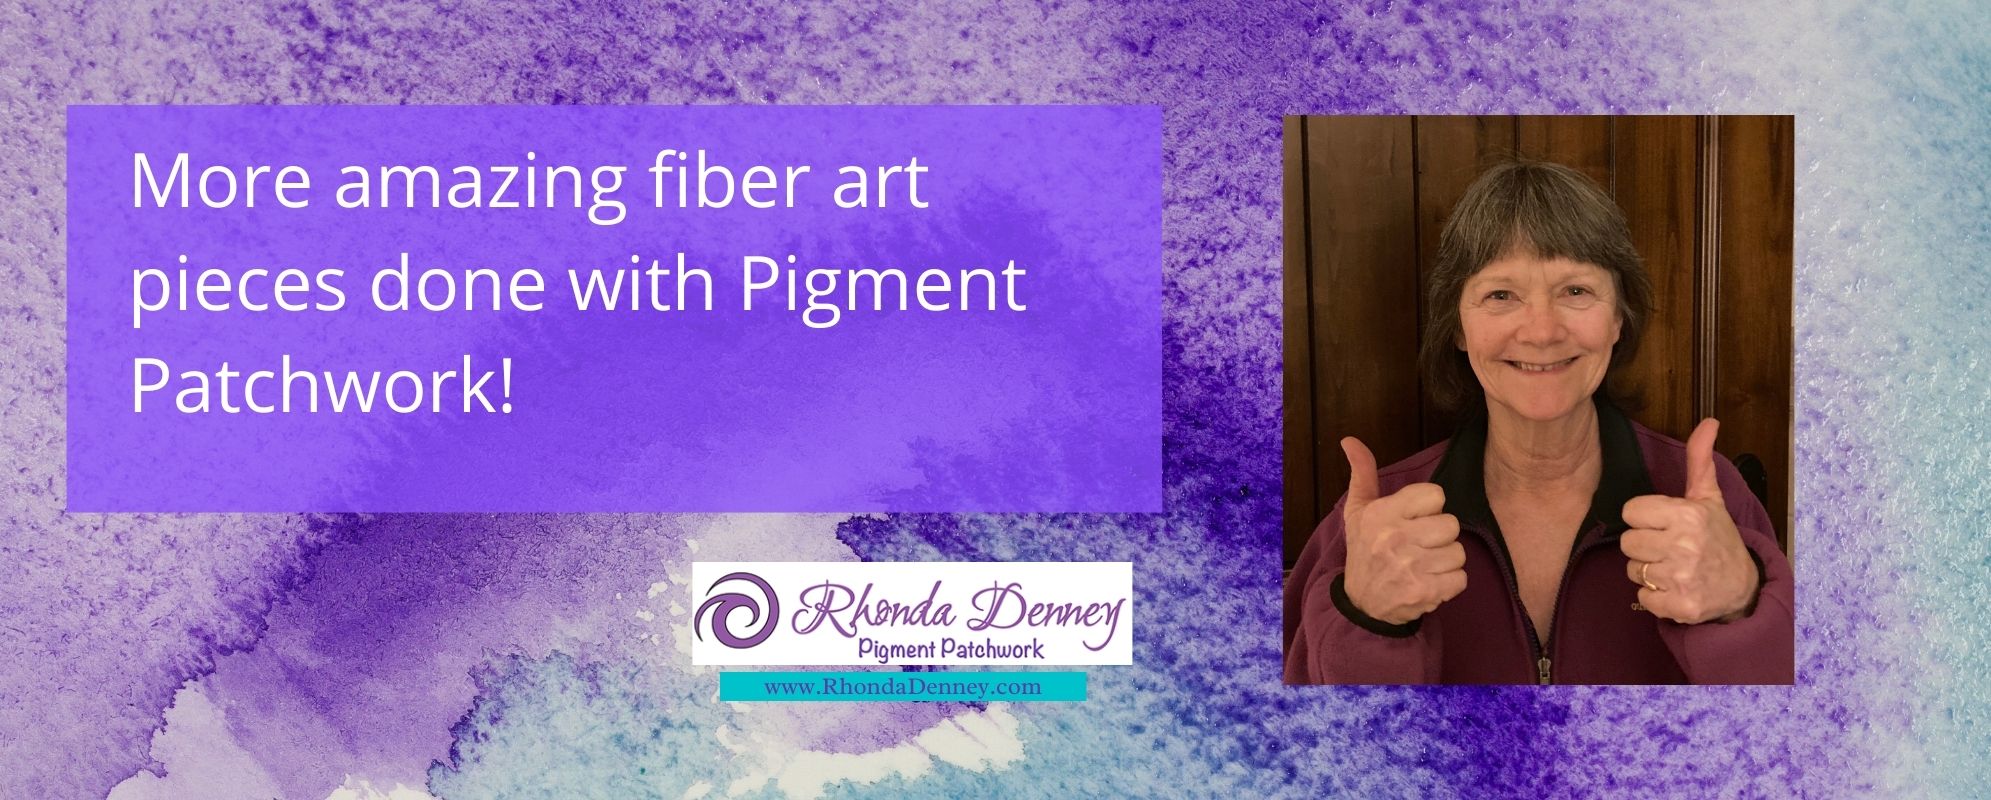 Rhonda Denney - More amazing fiber art pieces done with Pigment Patchwork!